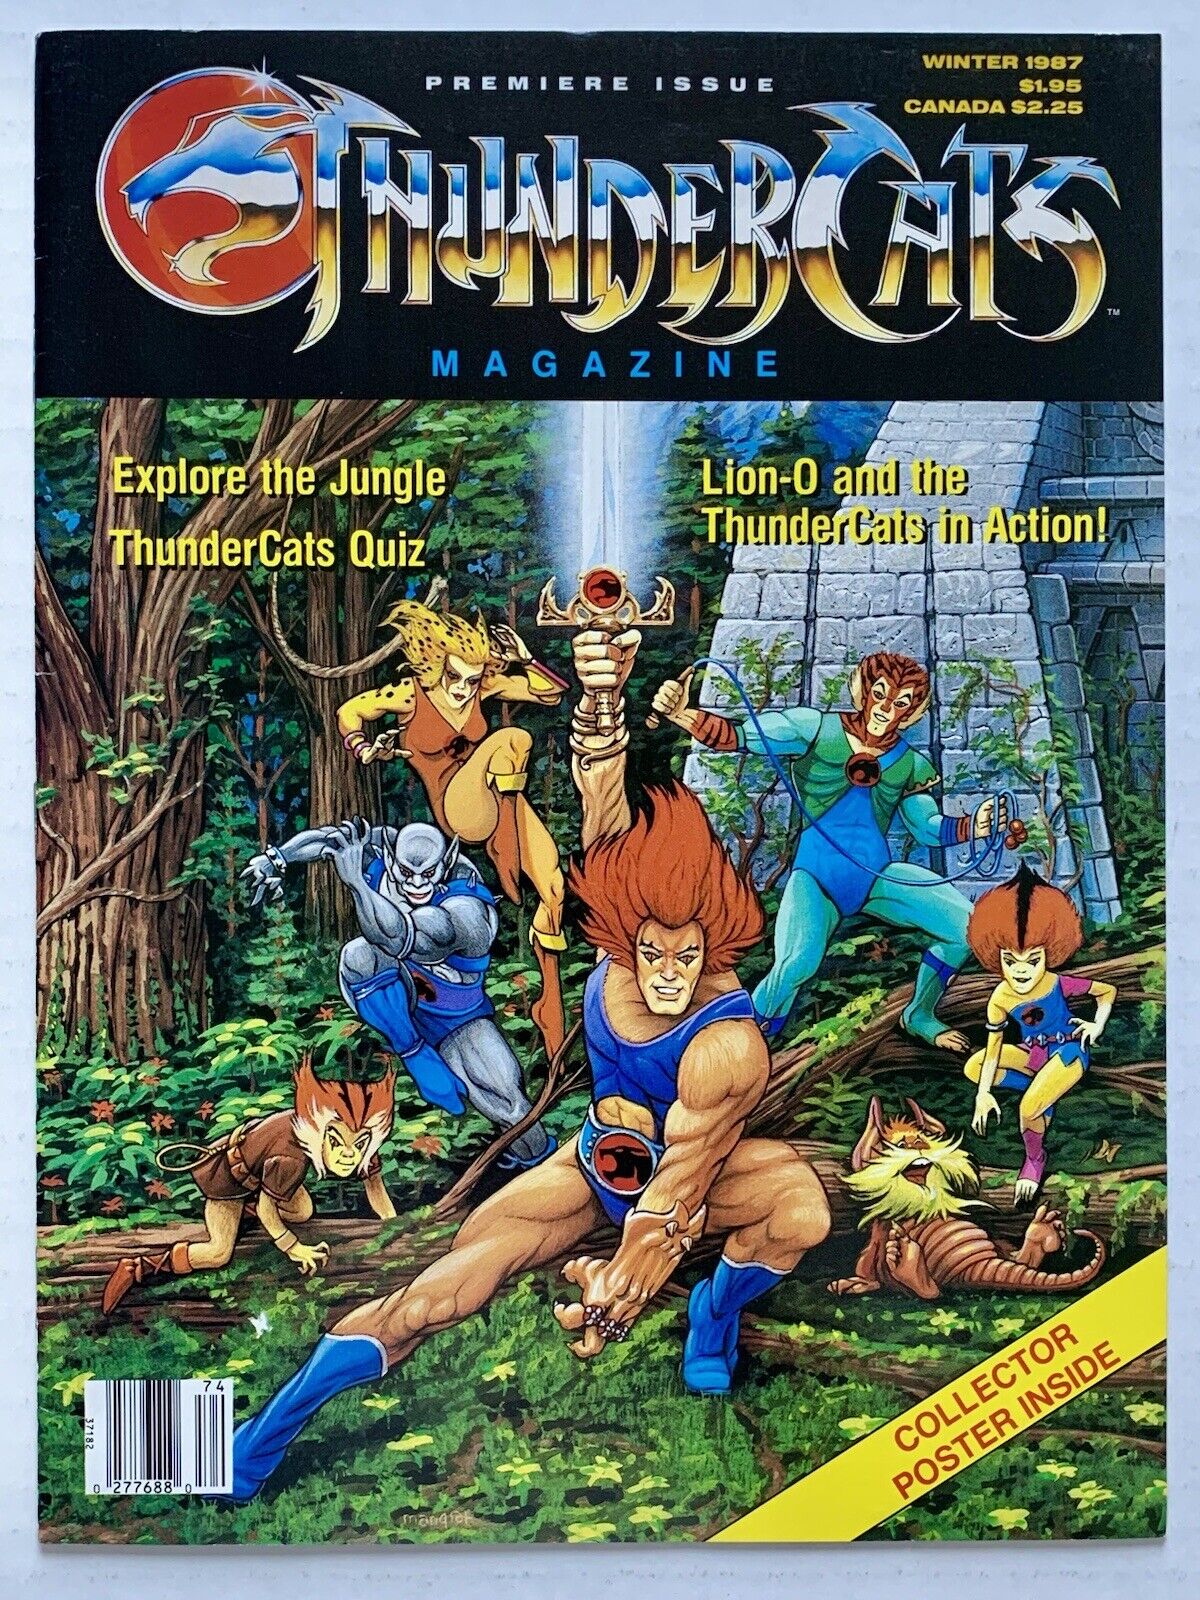 ThunderCats Magazine #1 (1987) with RARE Poster Intact  (NM-/9.0) -VINTAGE